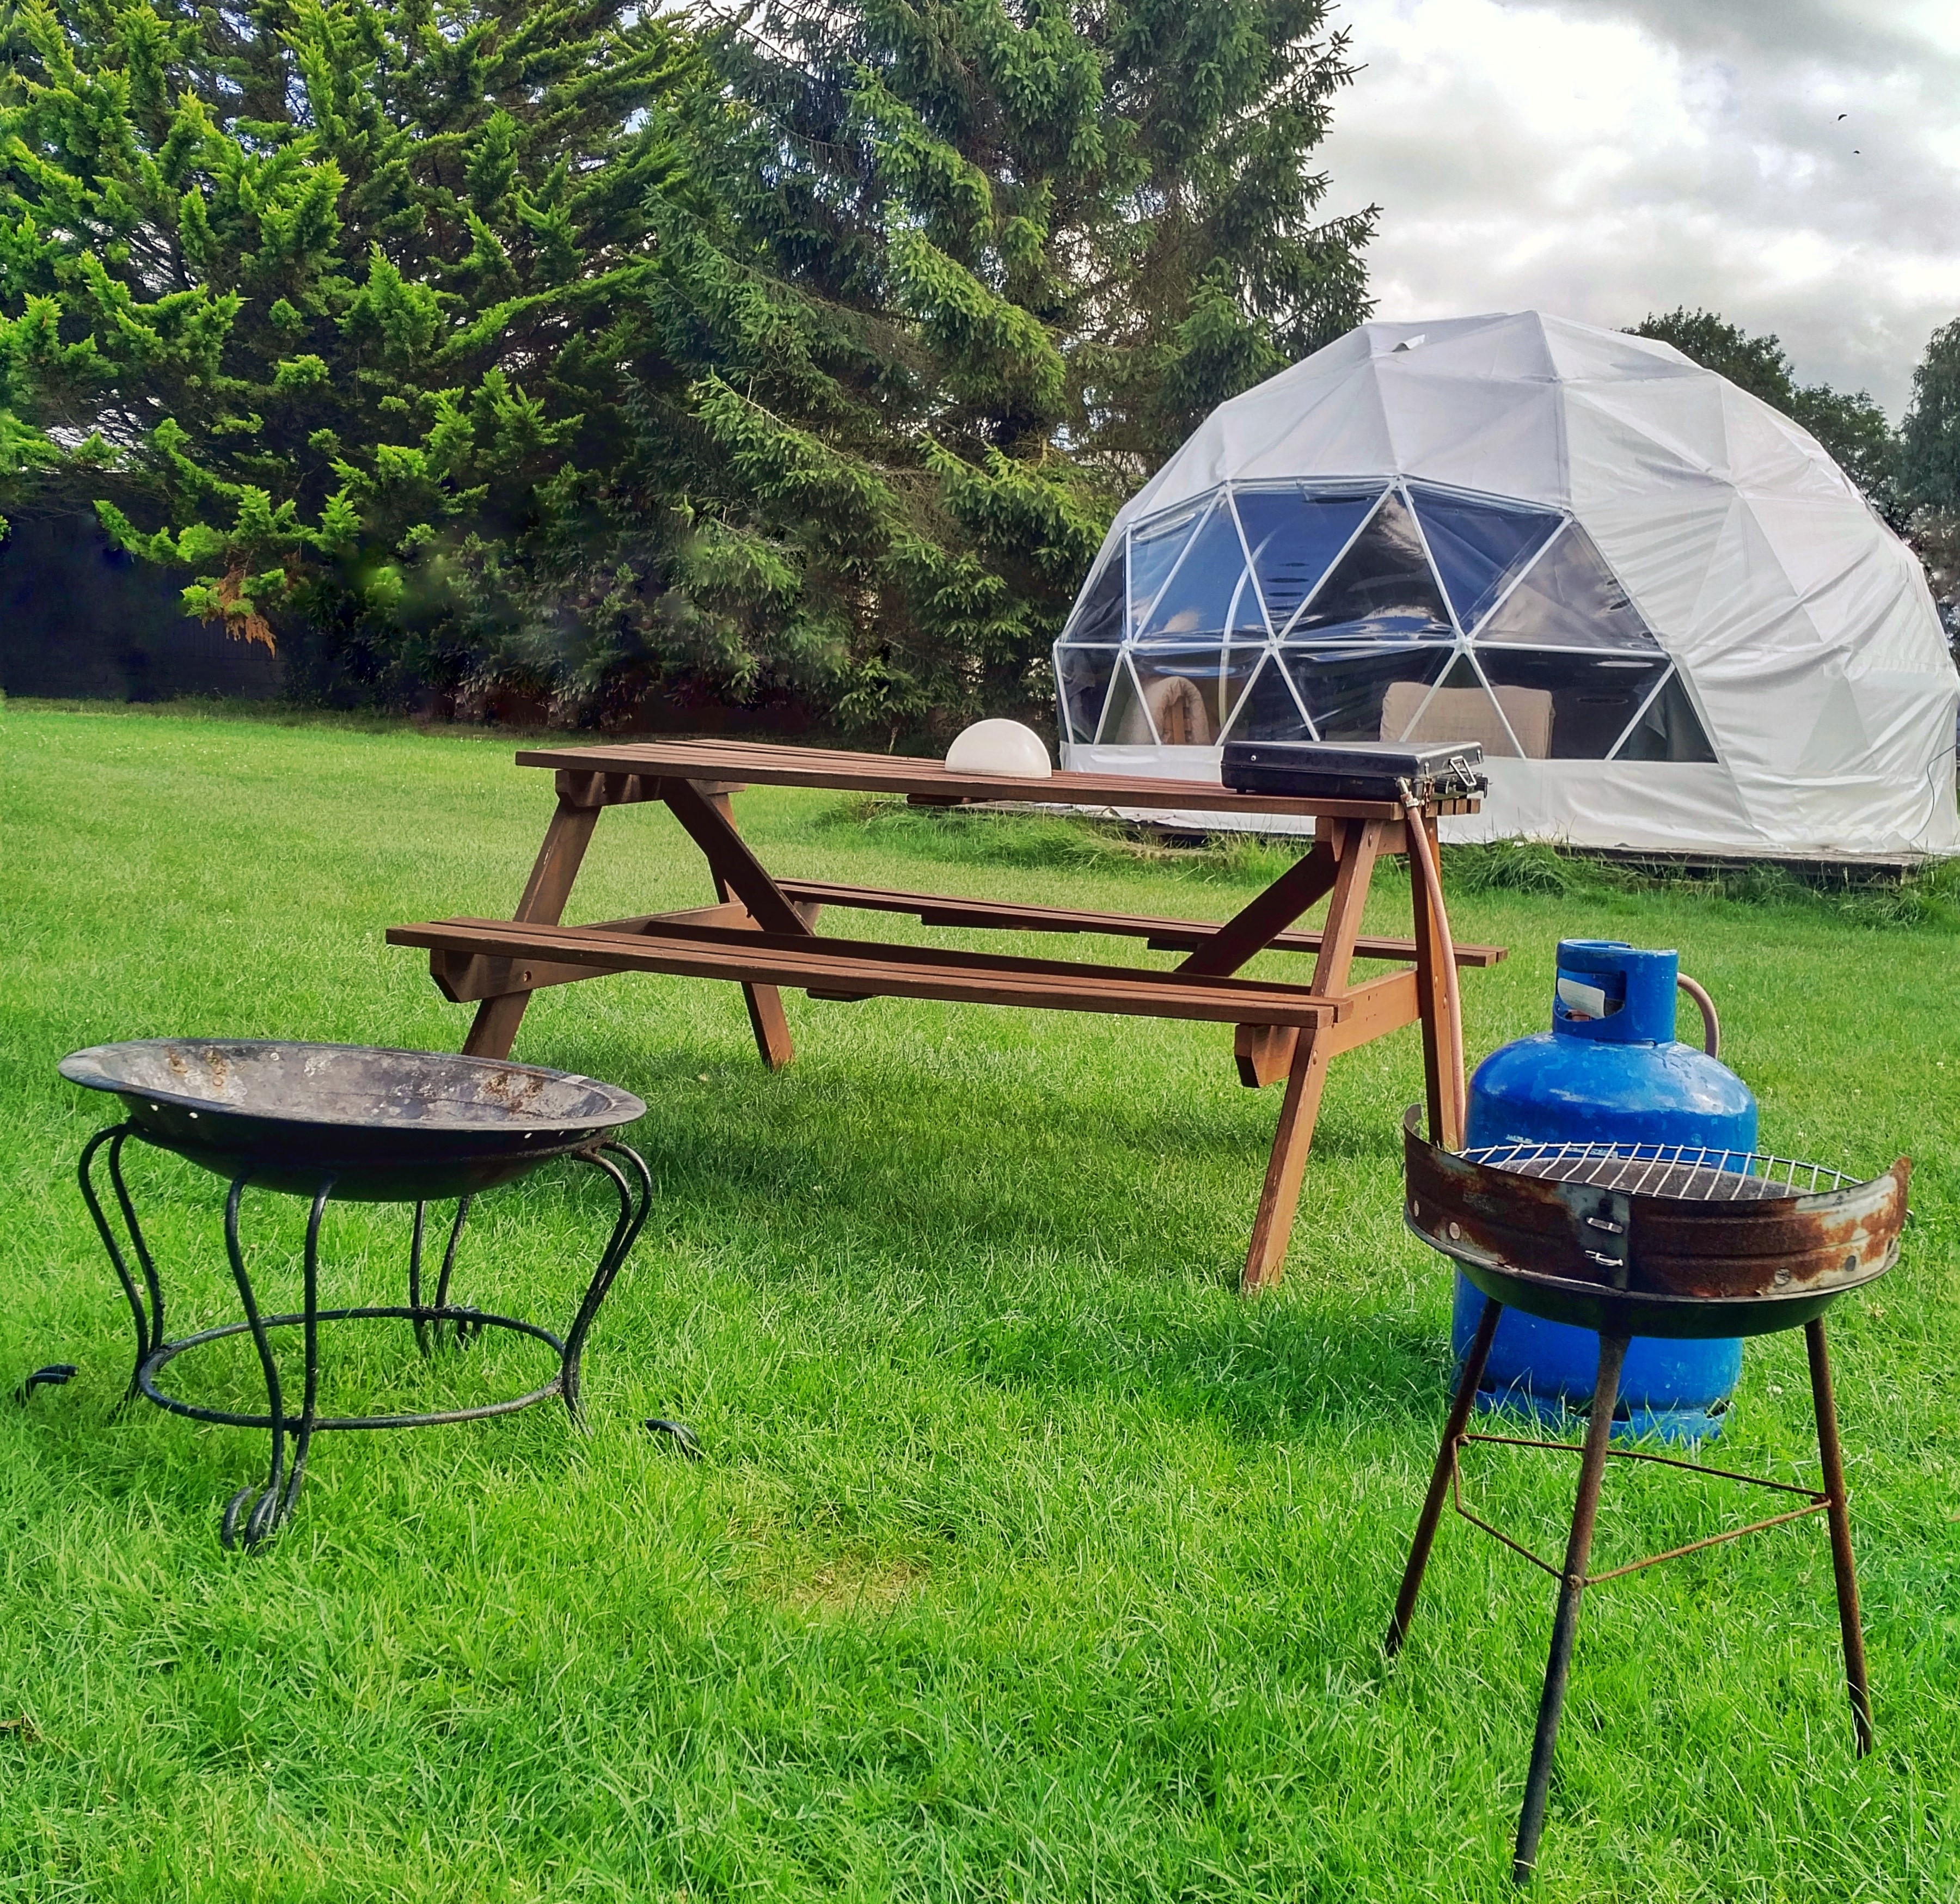 Geodesic Dome glamping at Dorset Country Holidays - dche.co.uk